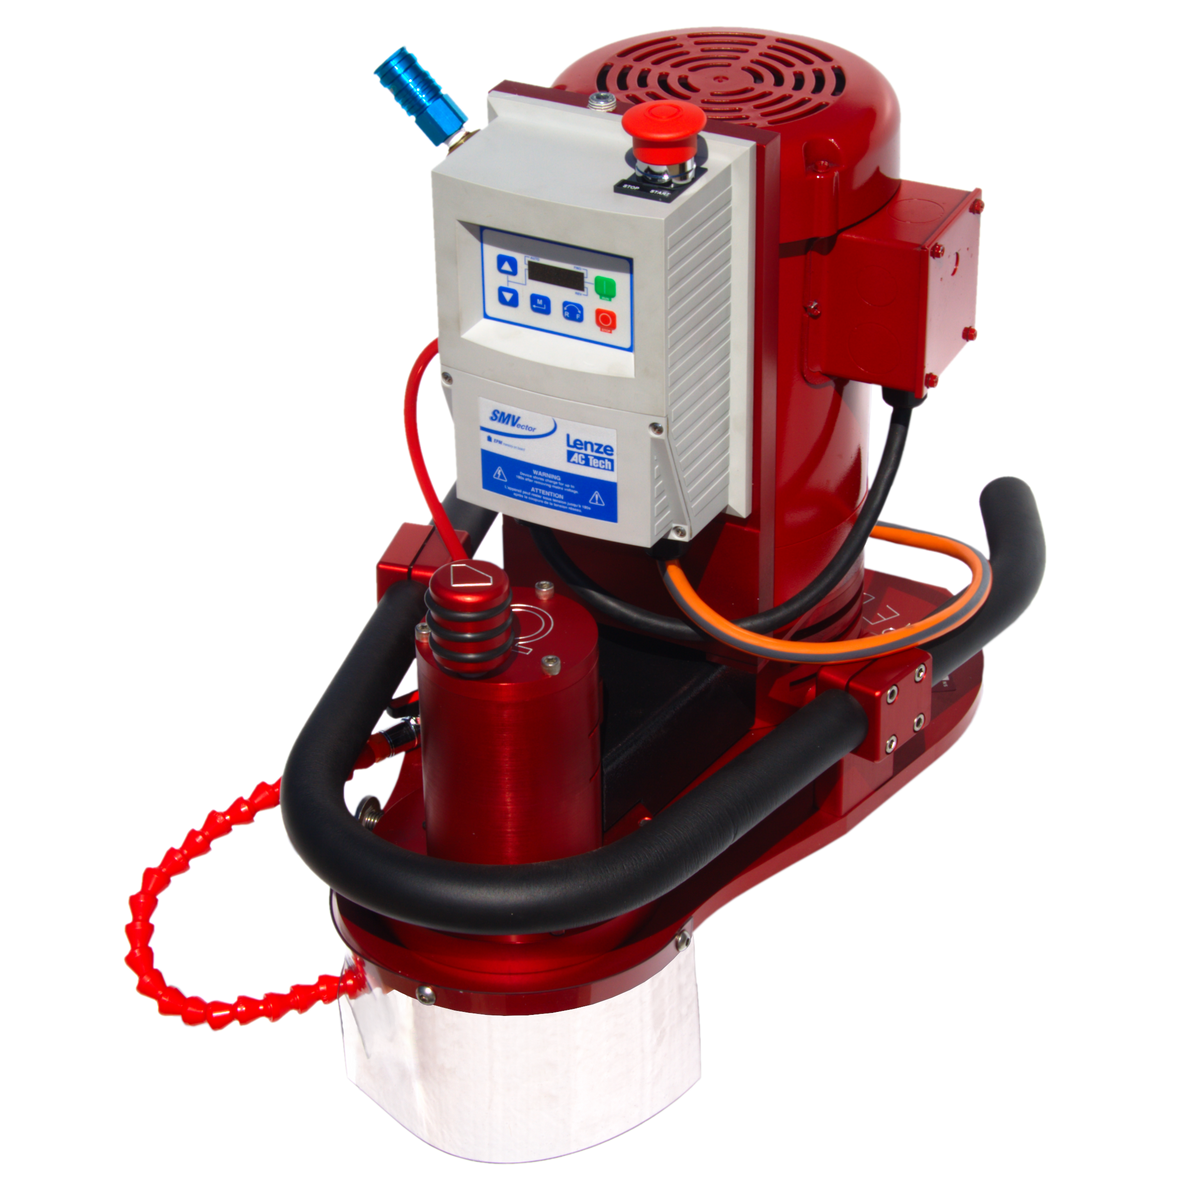 062-714 red-ripper-sr-3hp-variable-speed-20130208-1561571899950.png